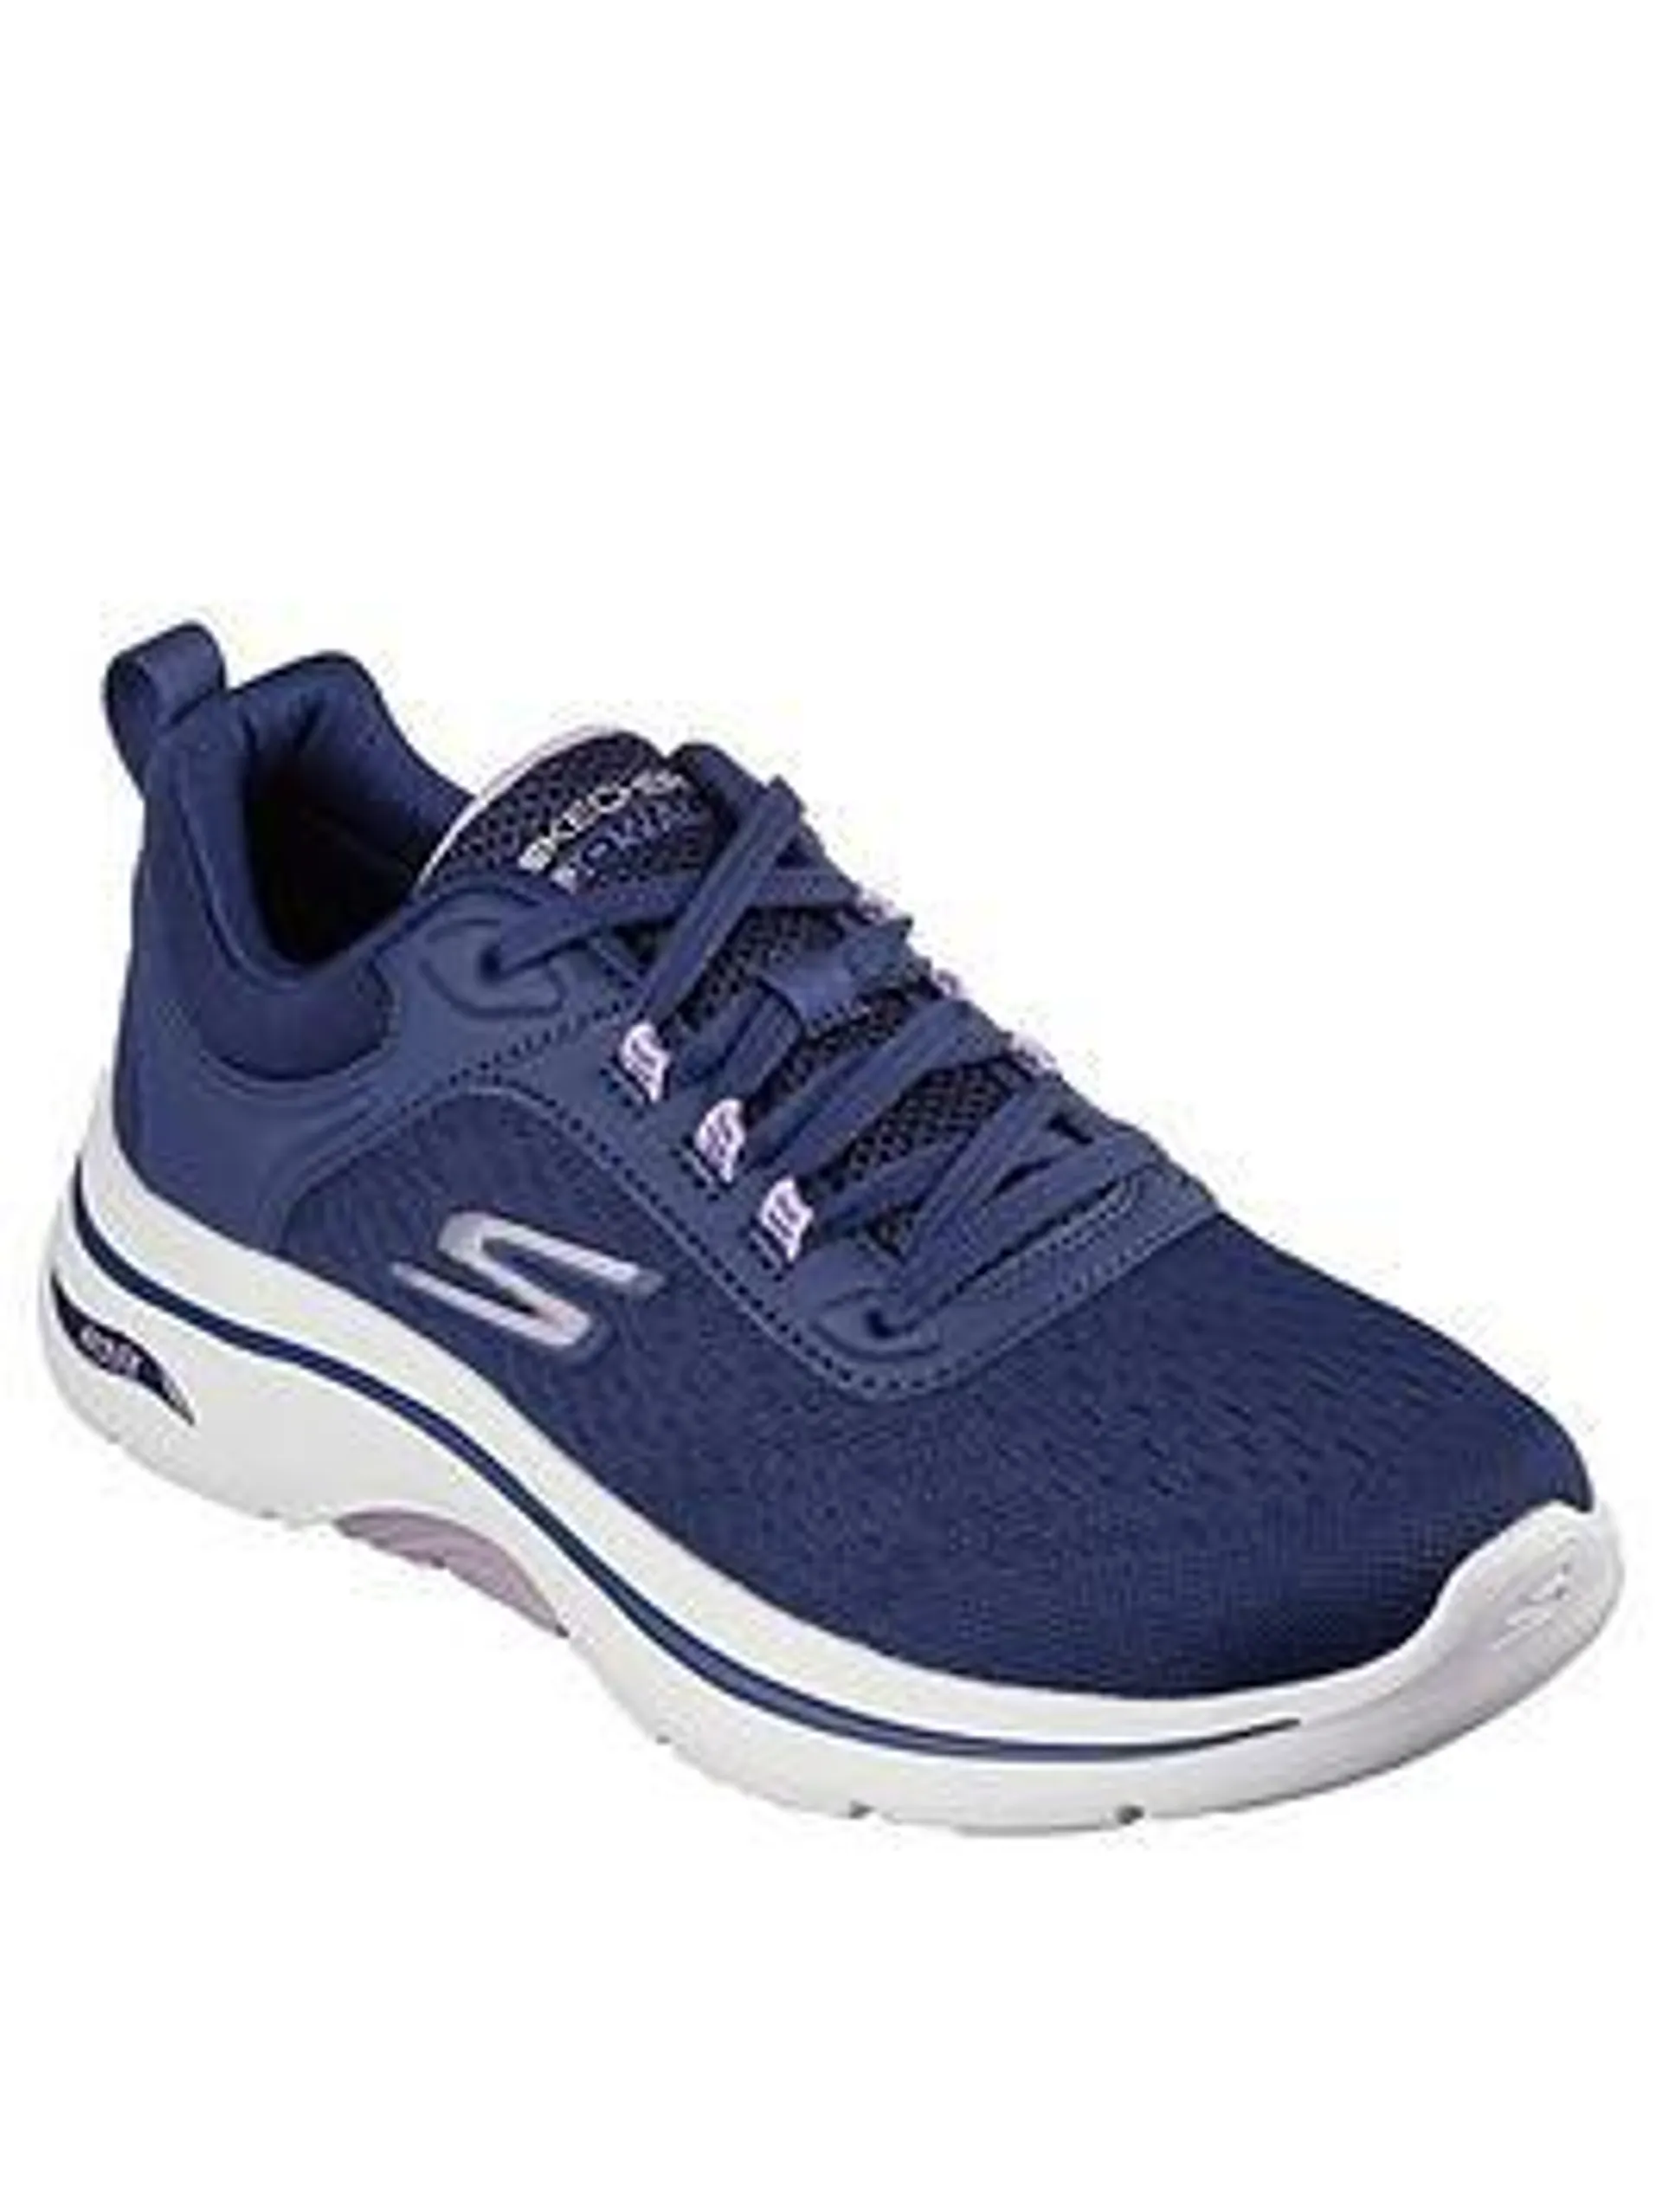 Skechers Go Walk Arch Fit 2.0 Mesh Lace Up Trainers - Navy & Lavender